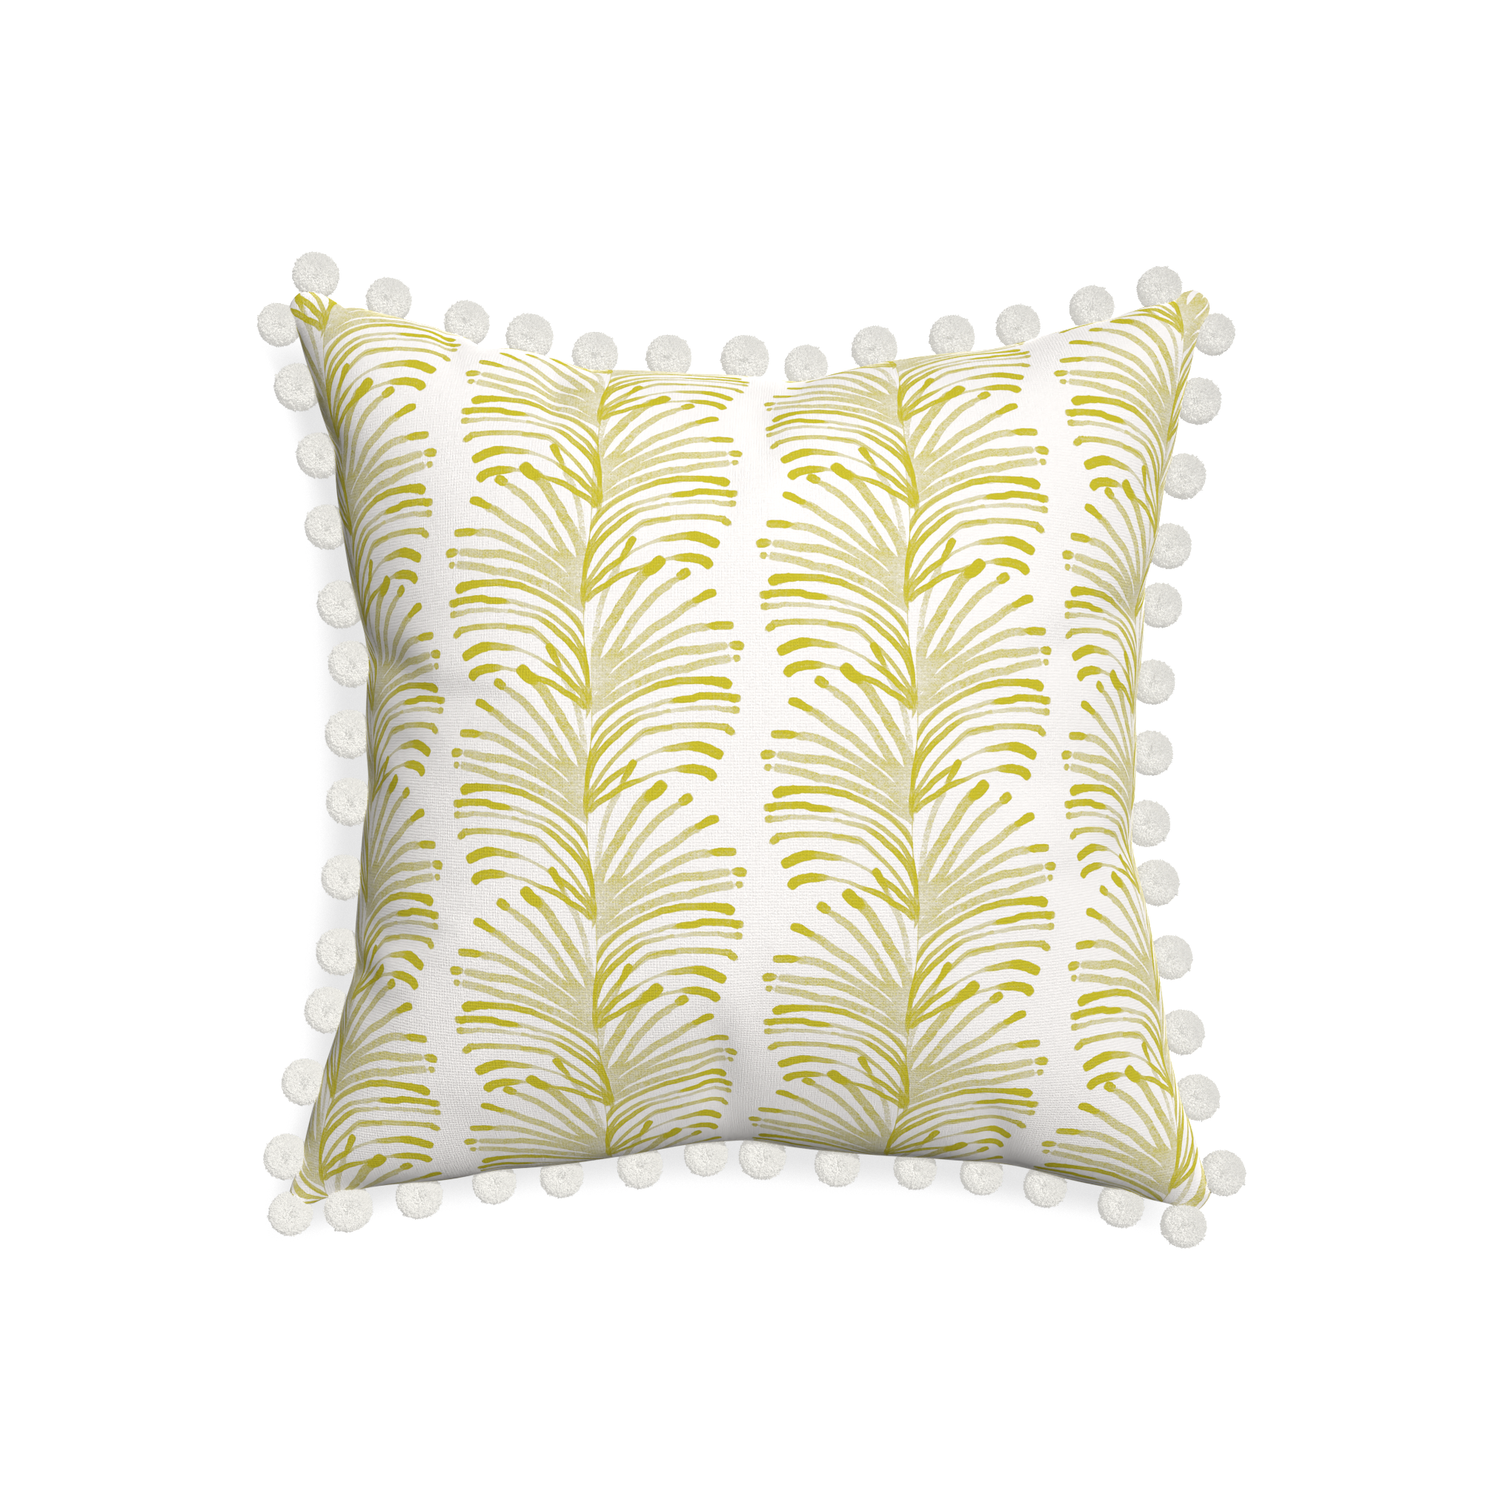 20-square emma chartreuse custom pillow with snow pom pom on white background